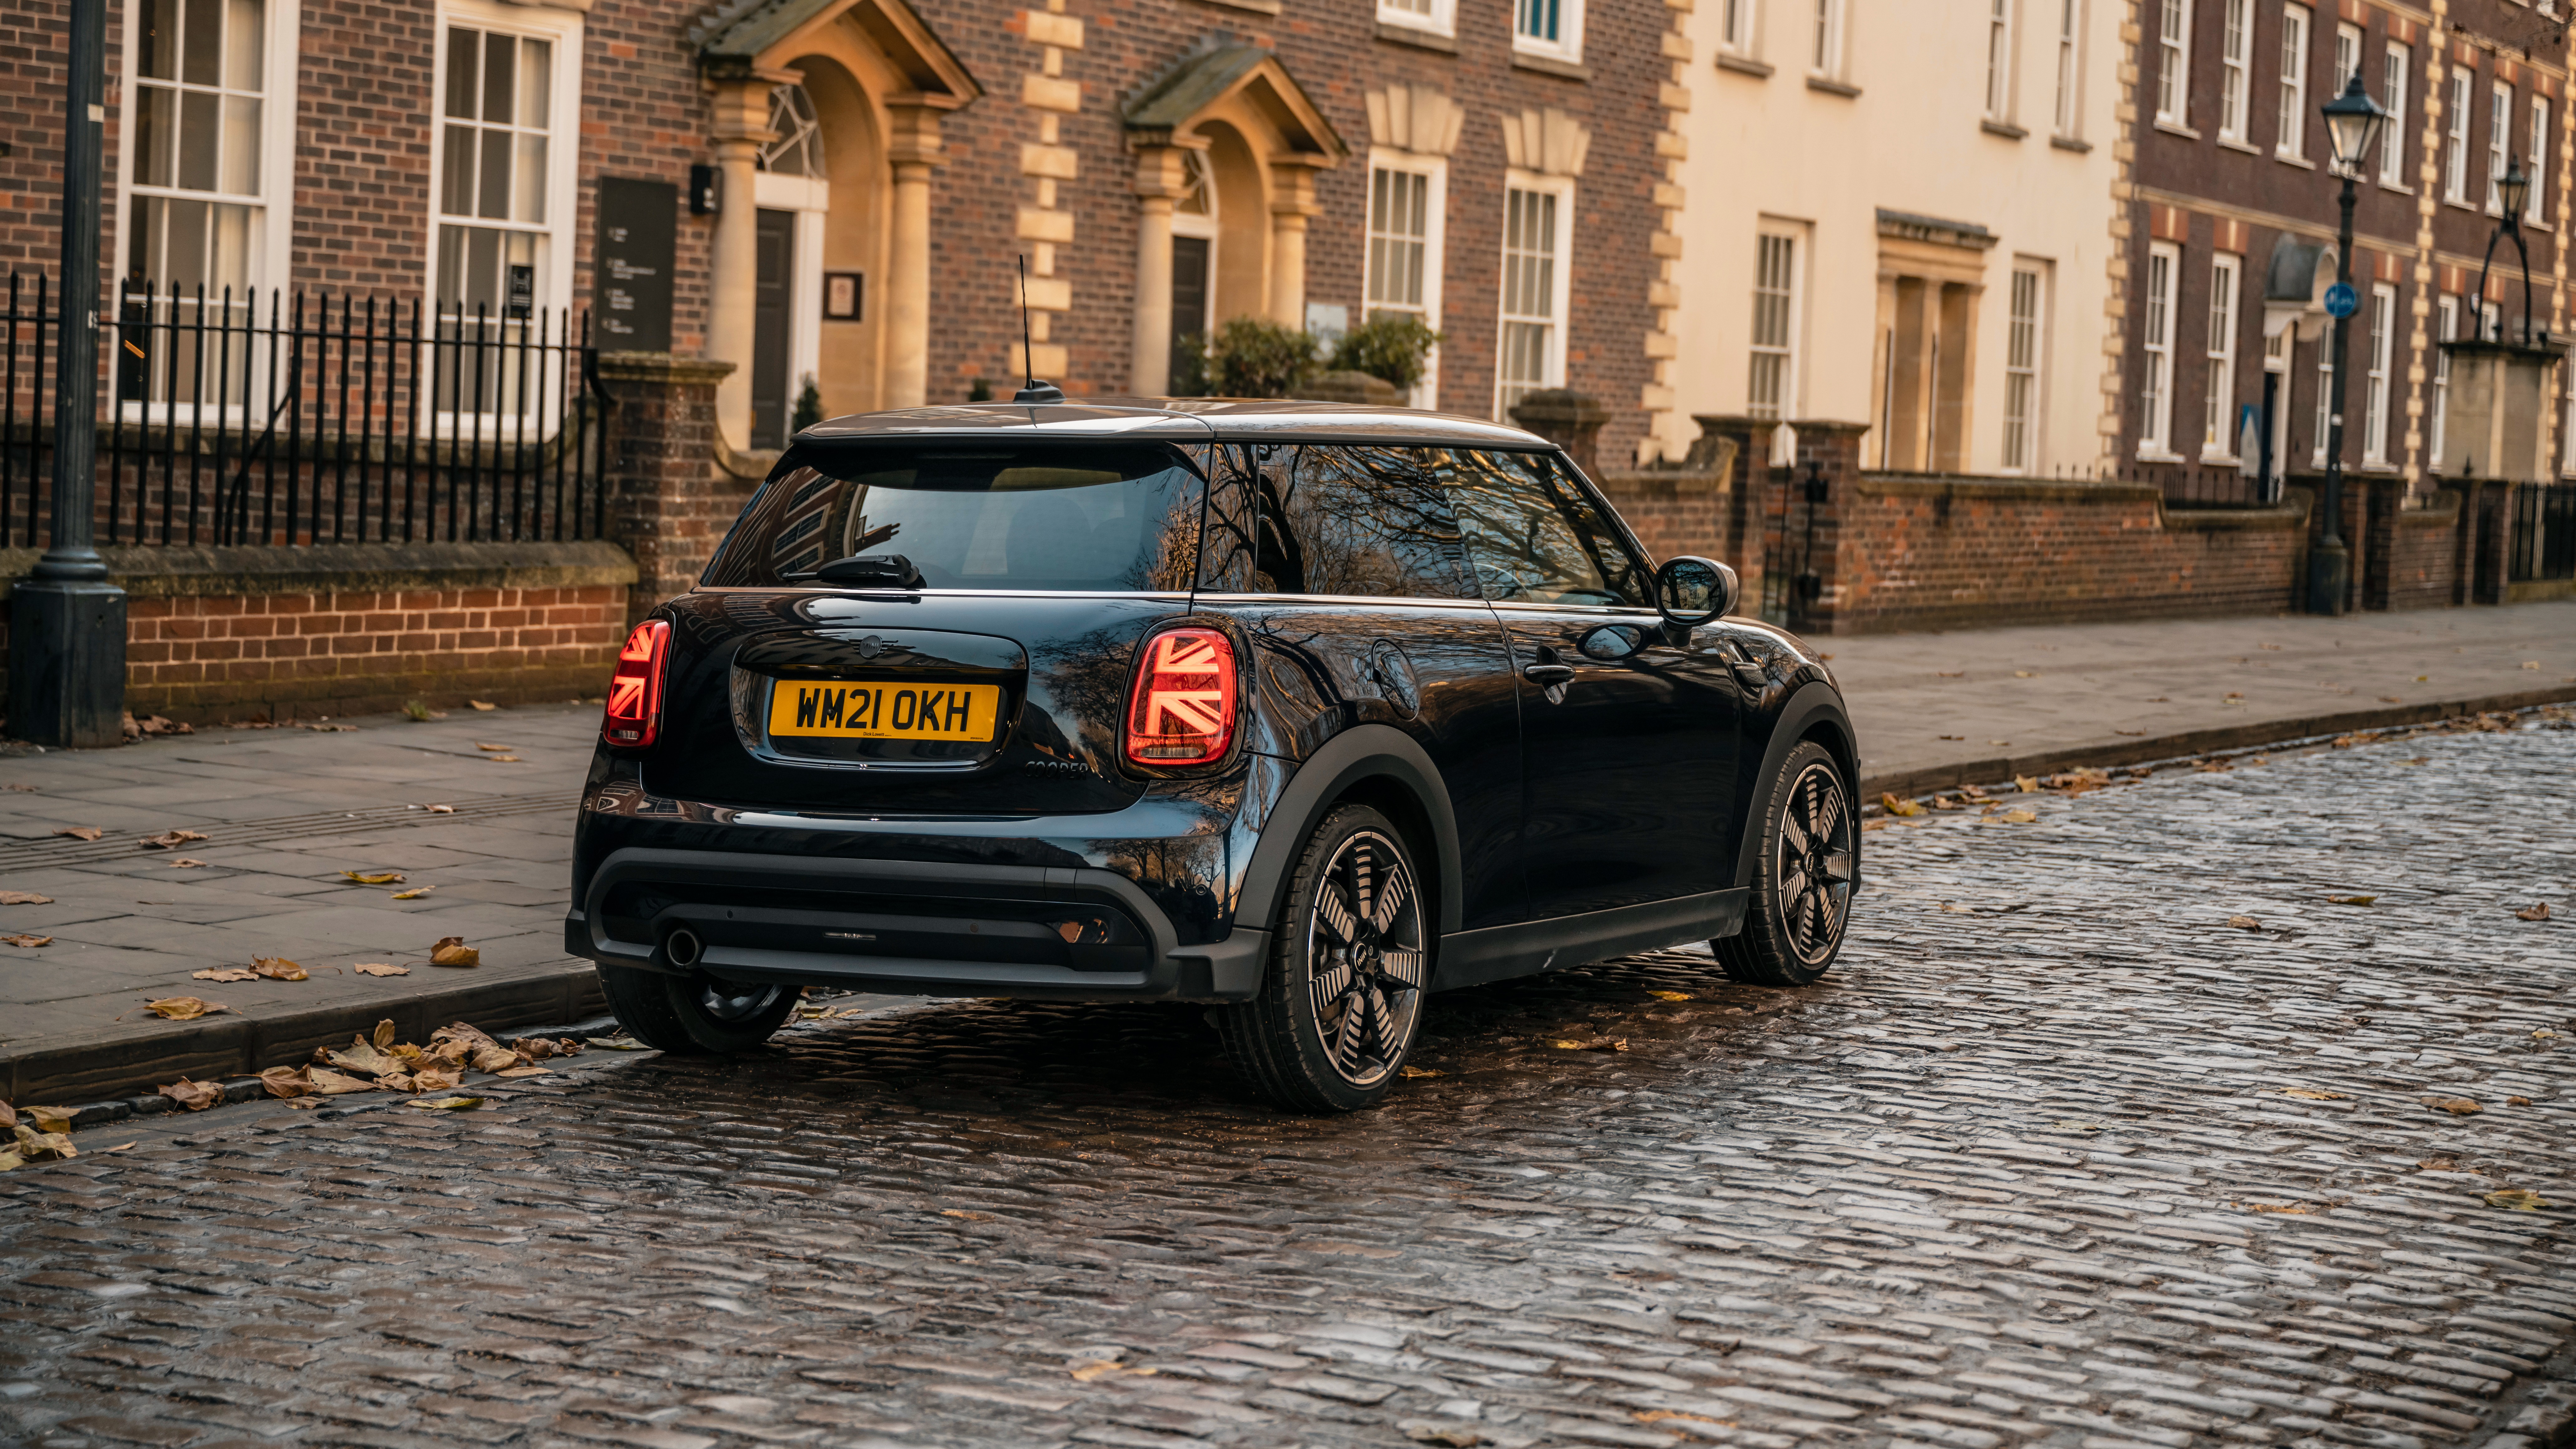 COME ALONG AND MEET THE NEW MINI FAMILY.